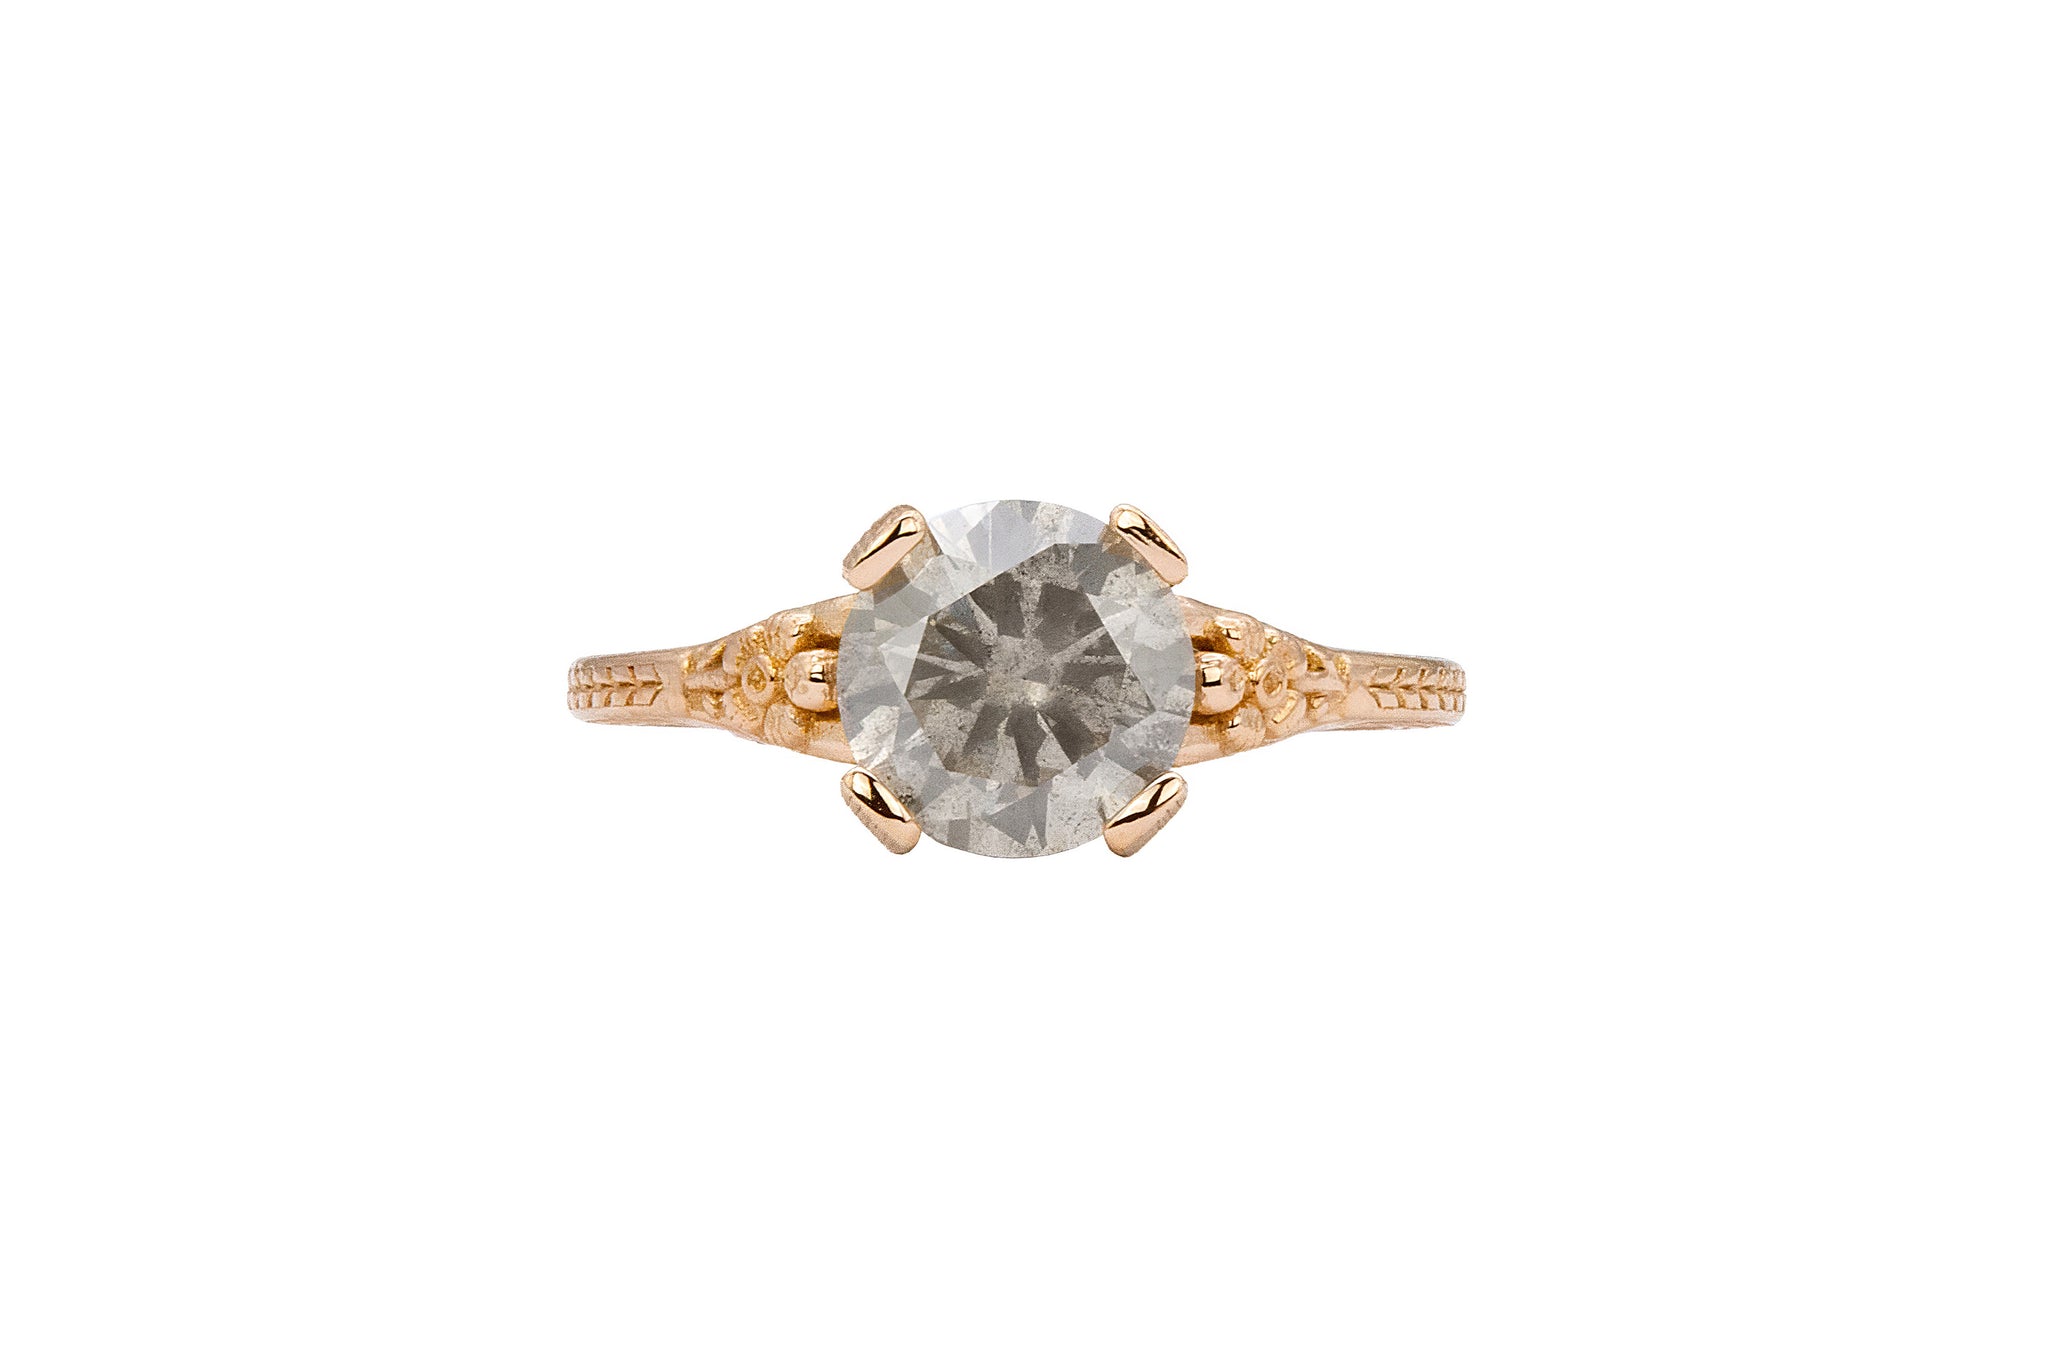 Grey Diamond Art Deco Flower Solitaire Ring - S. Kind & Co